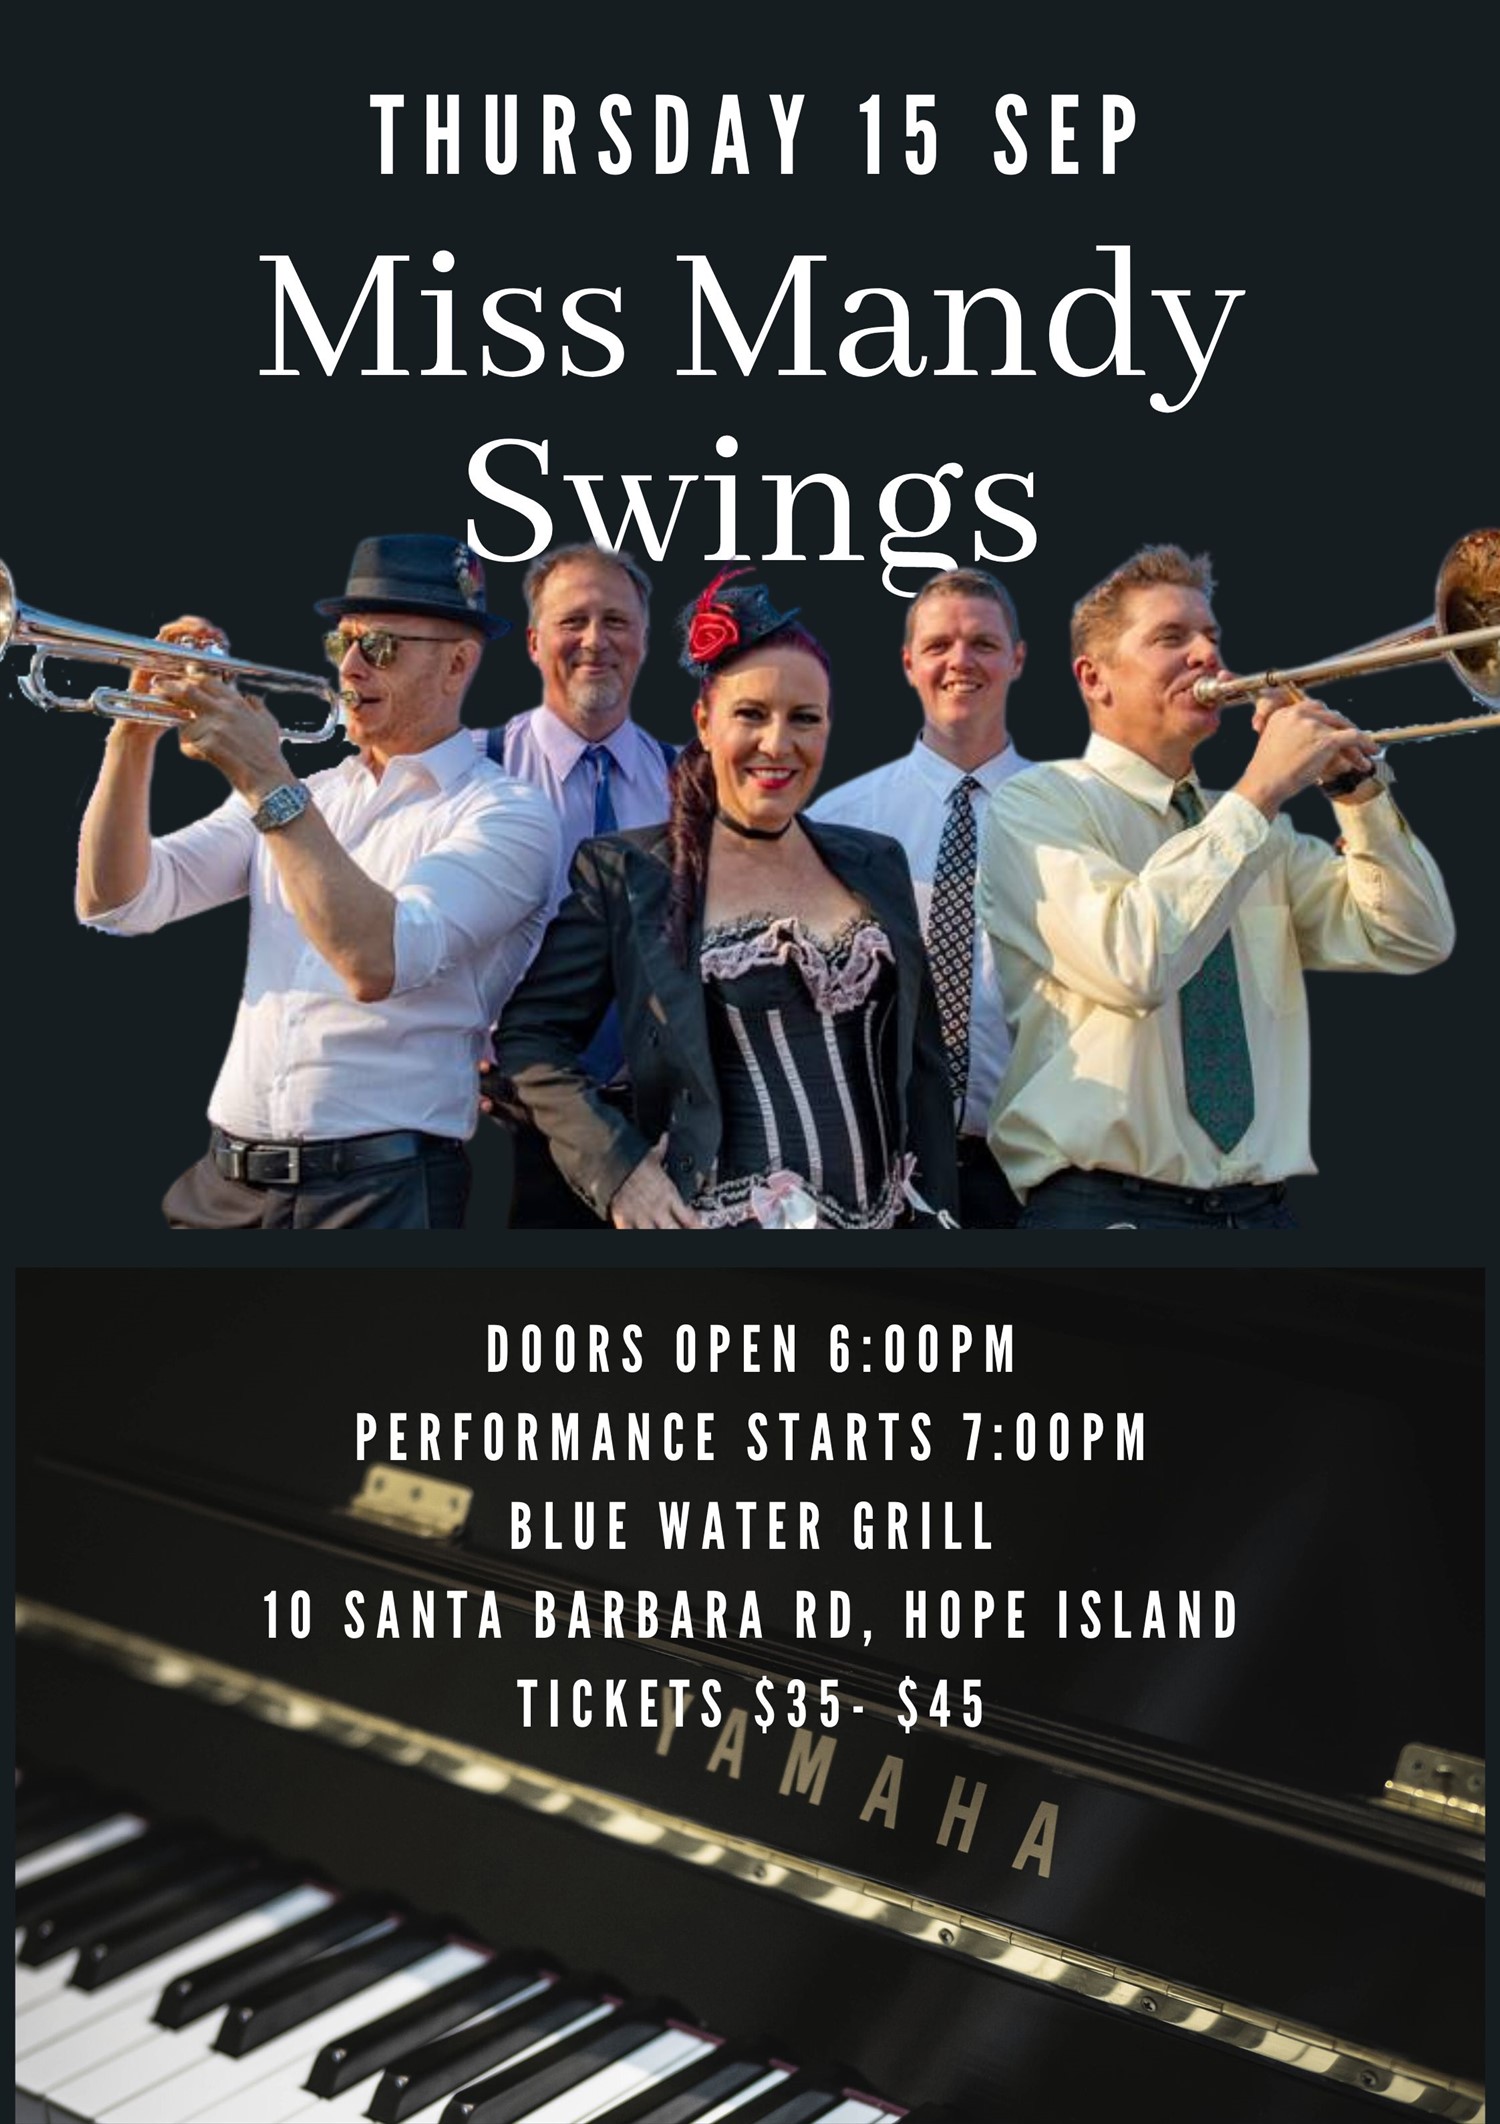 Miss Mandy Swings  on sep. 15, 18:00@Hope Island Jazz - Blue Water Grill - Buy tickets and Get information on  